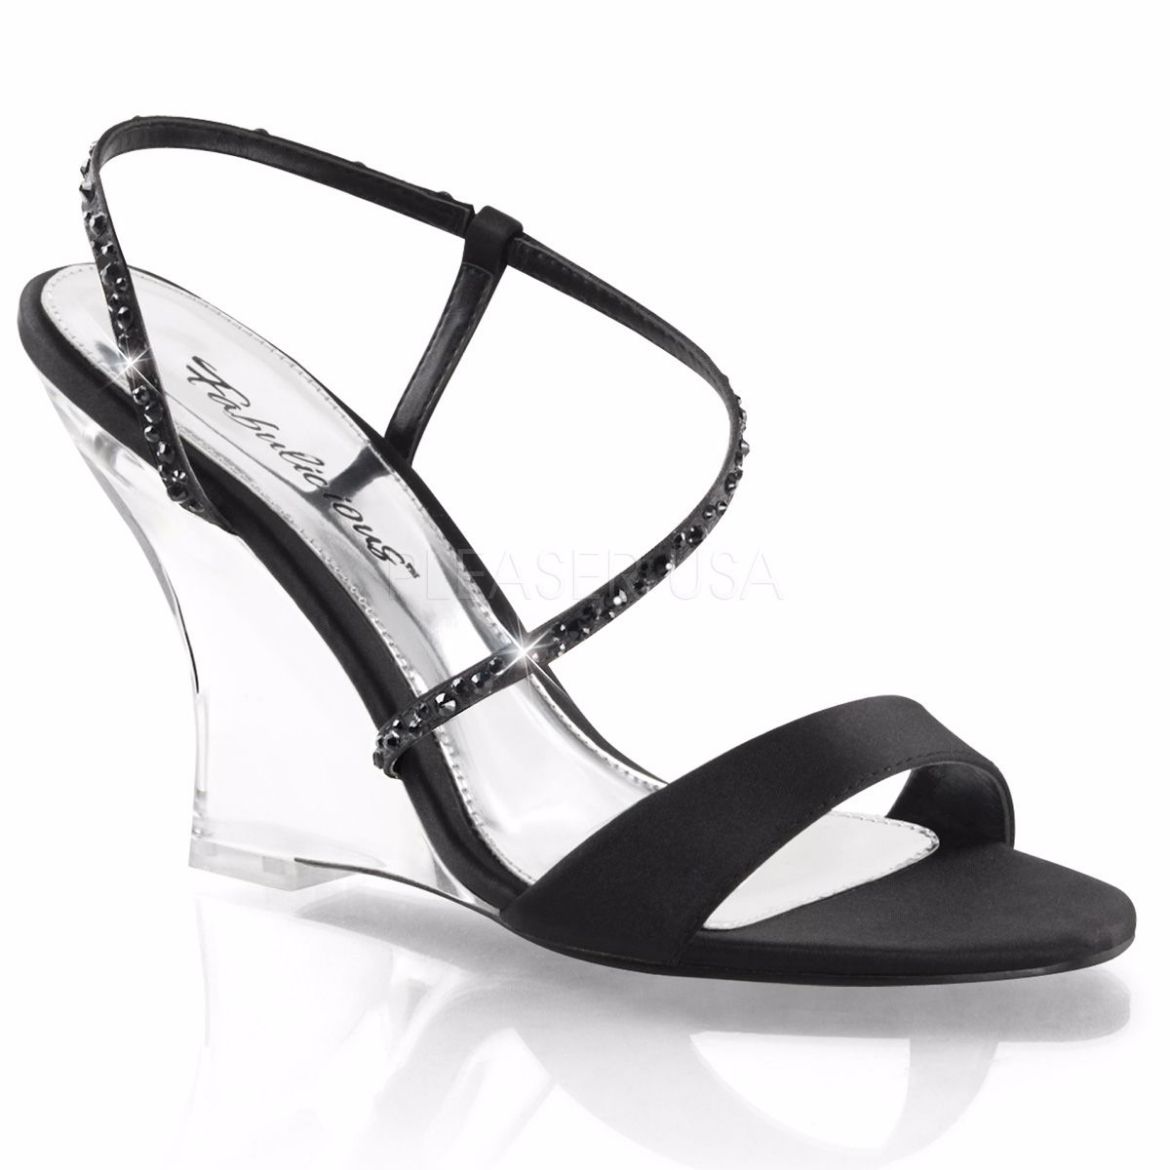 Product image of Fabulicious Lovely-417 Black Satin/Clear, 4 inch (10.2 cm) Wedge Sandal Shoes